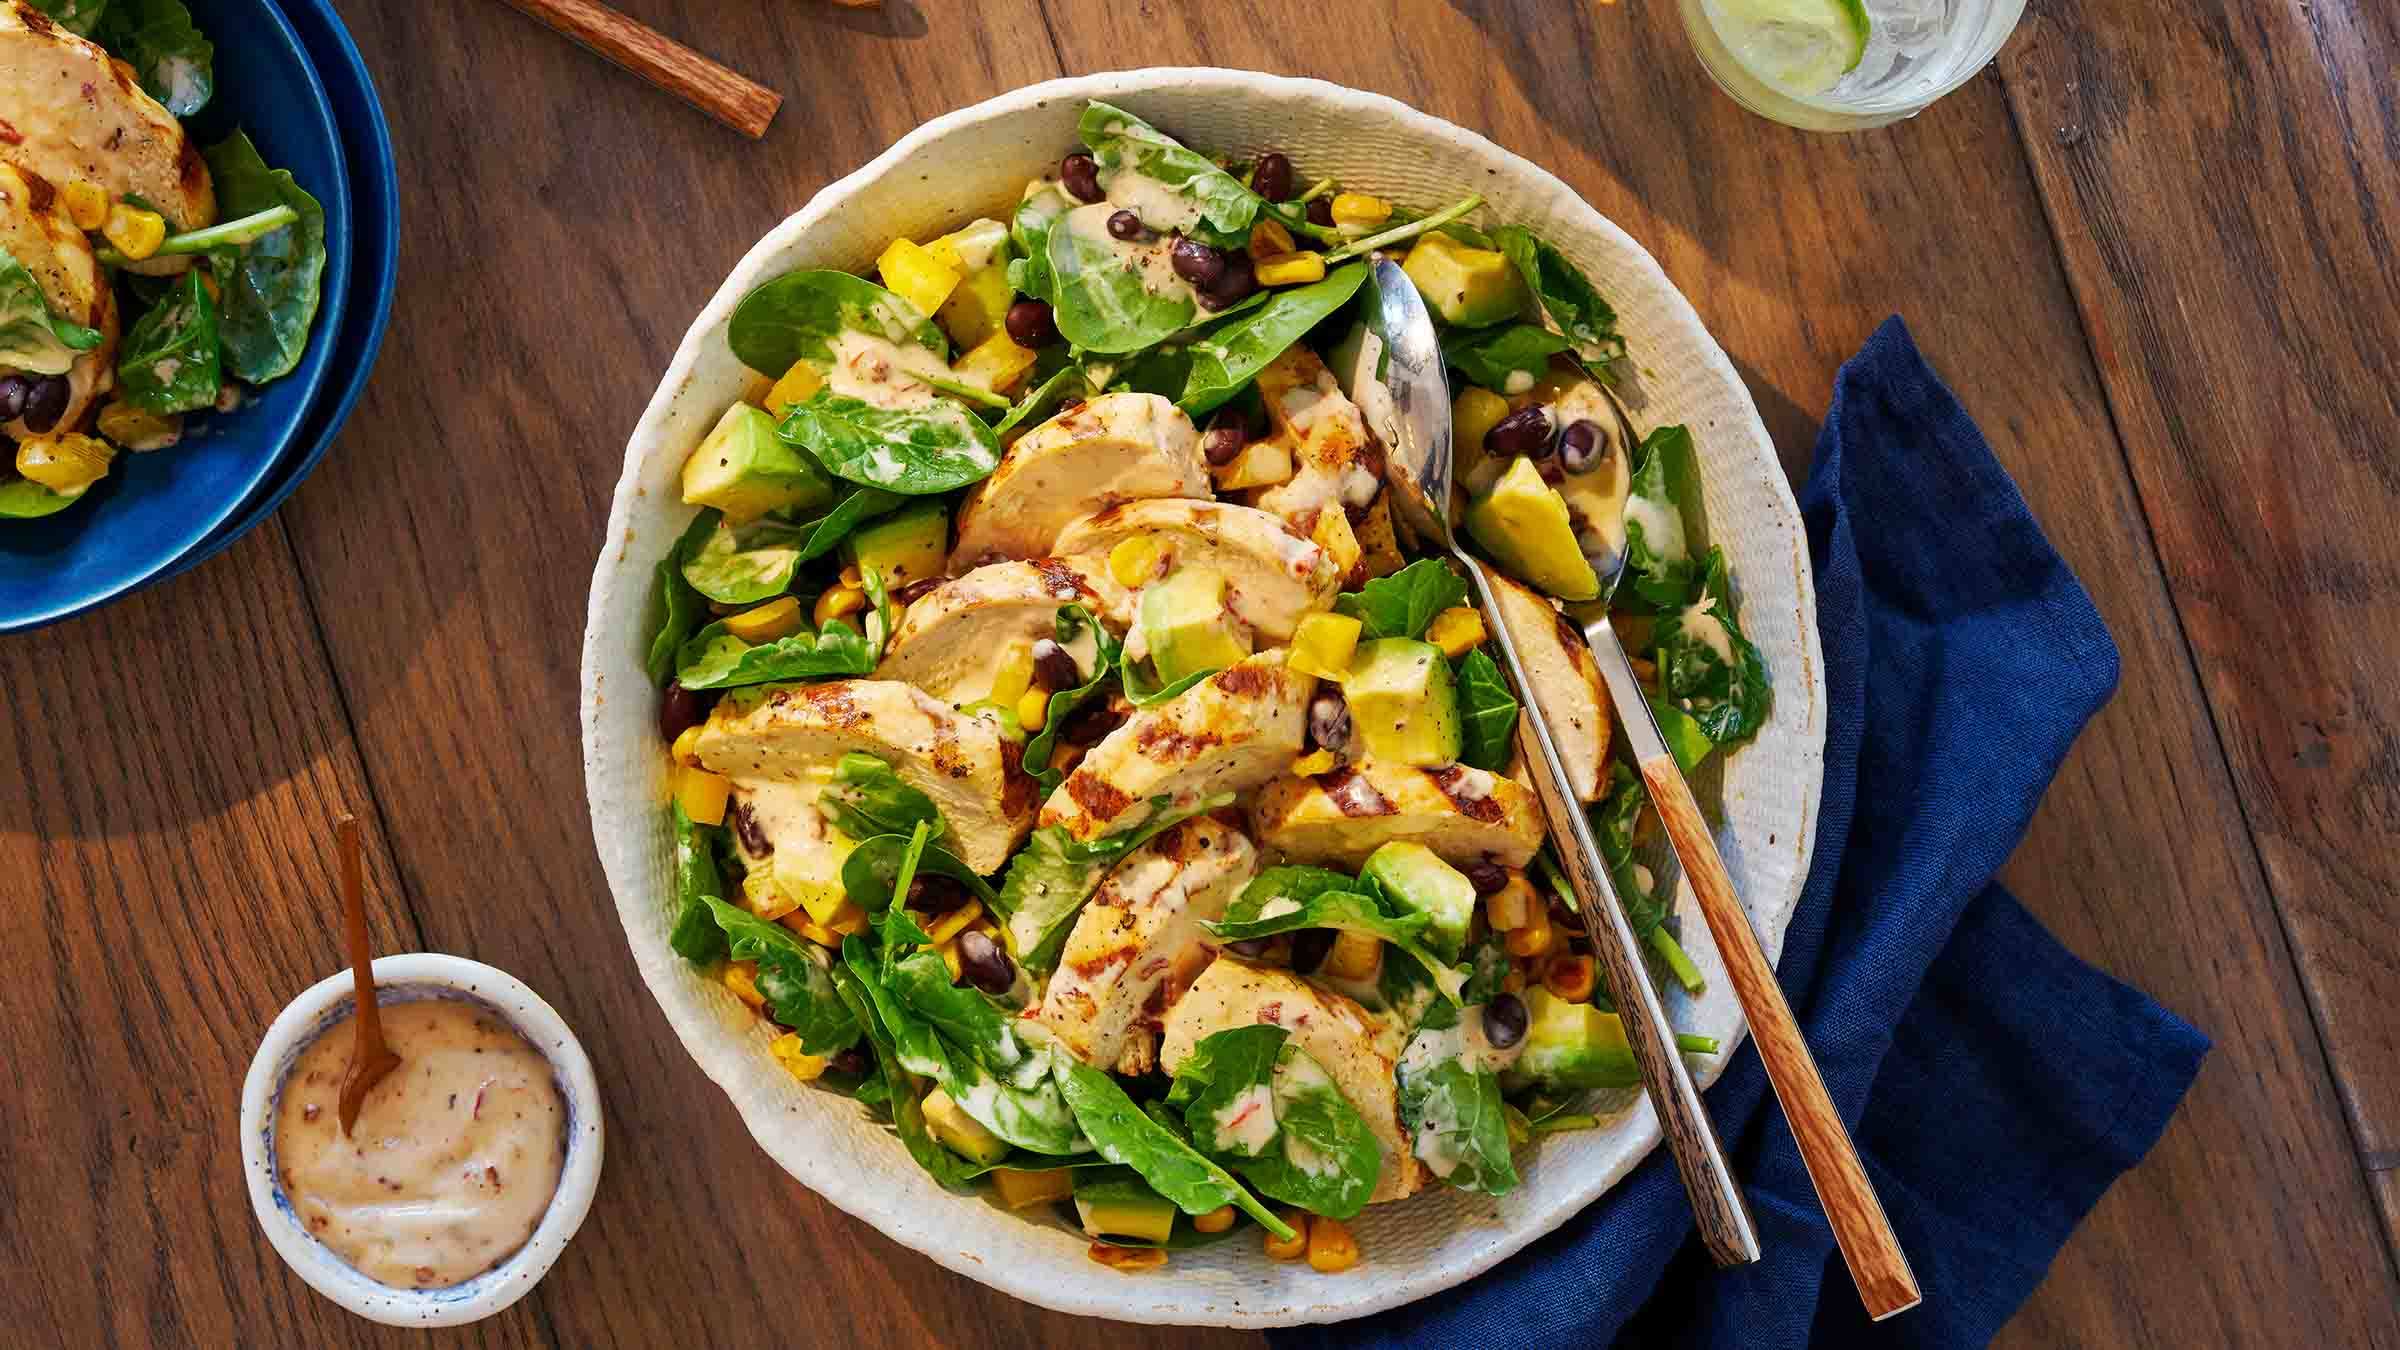 Spicy Southwest Ranch Salad with Chicken